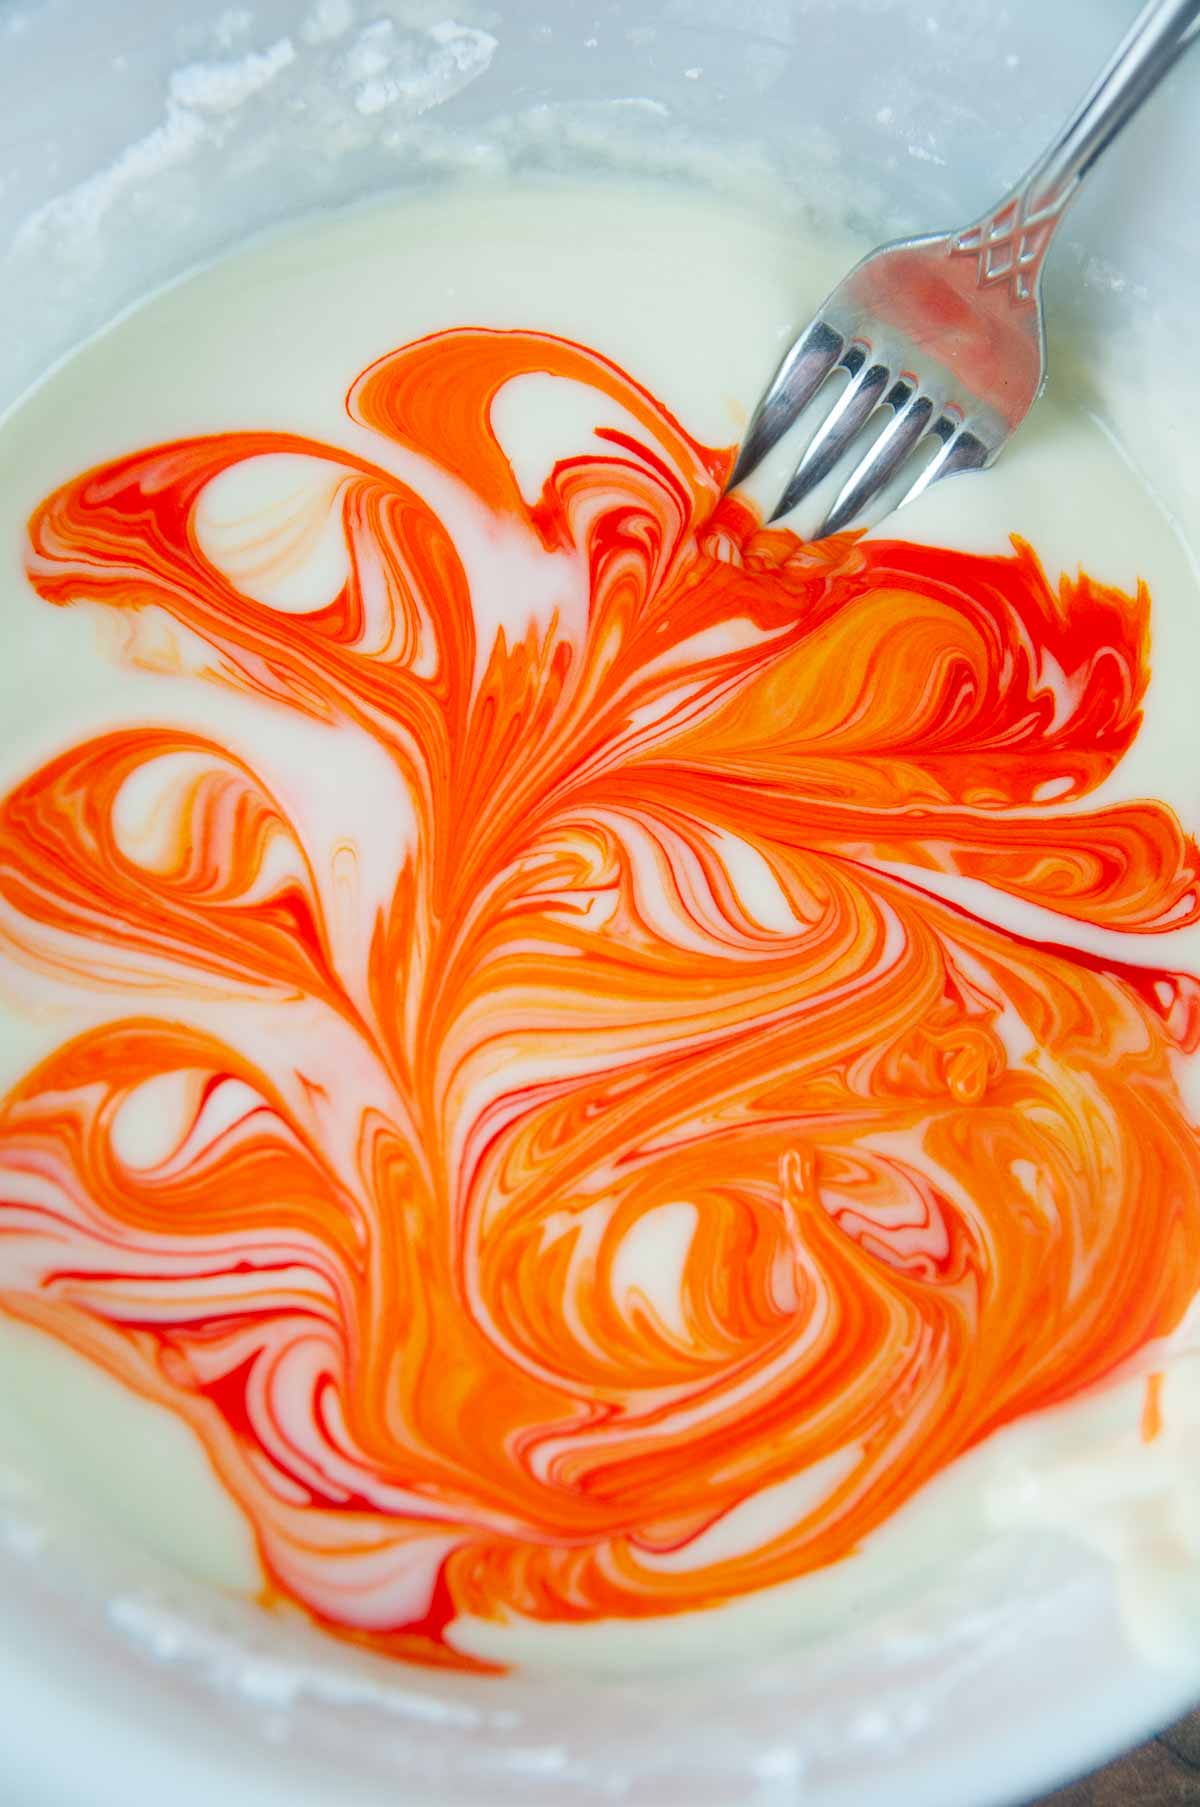 Drag a fork through the food coloring and icing to swirl it for a marbled effect.